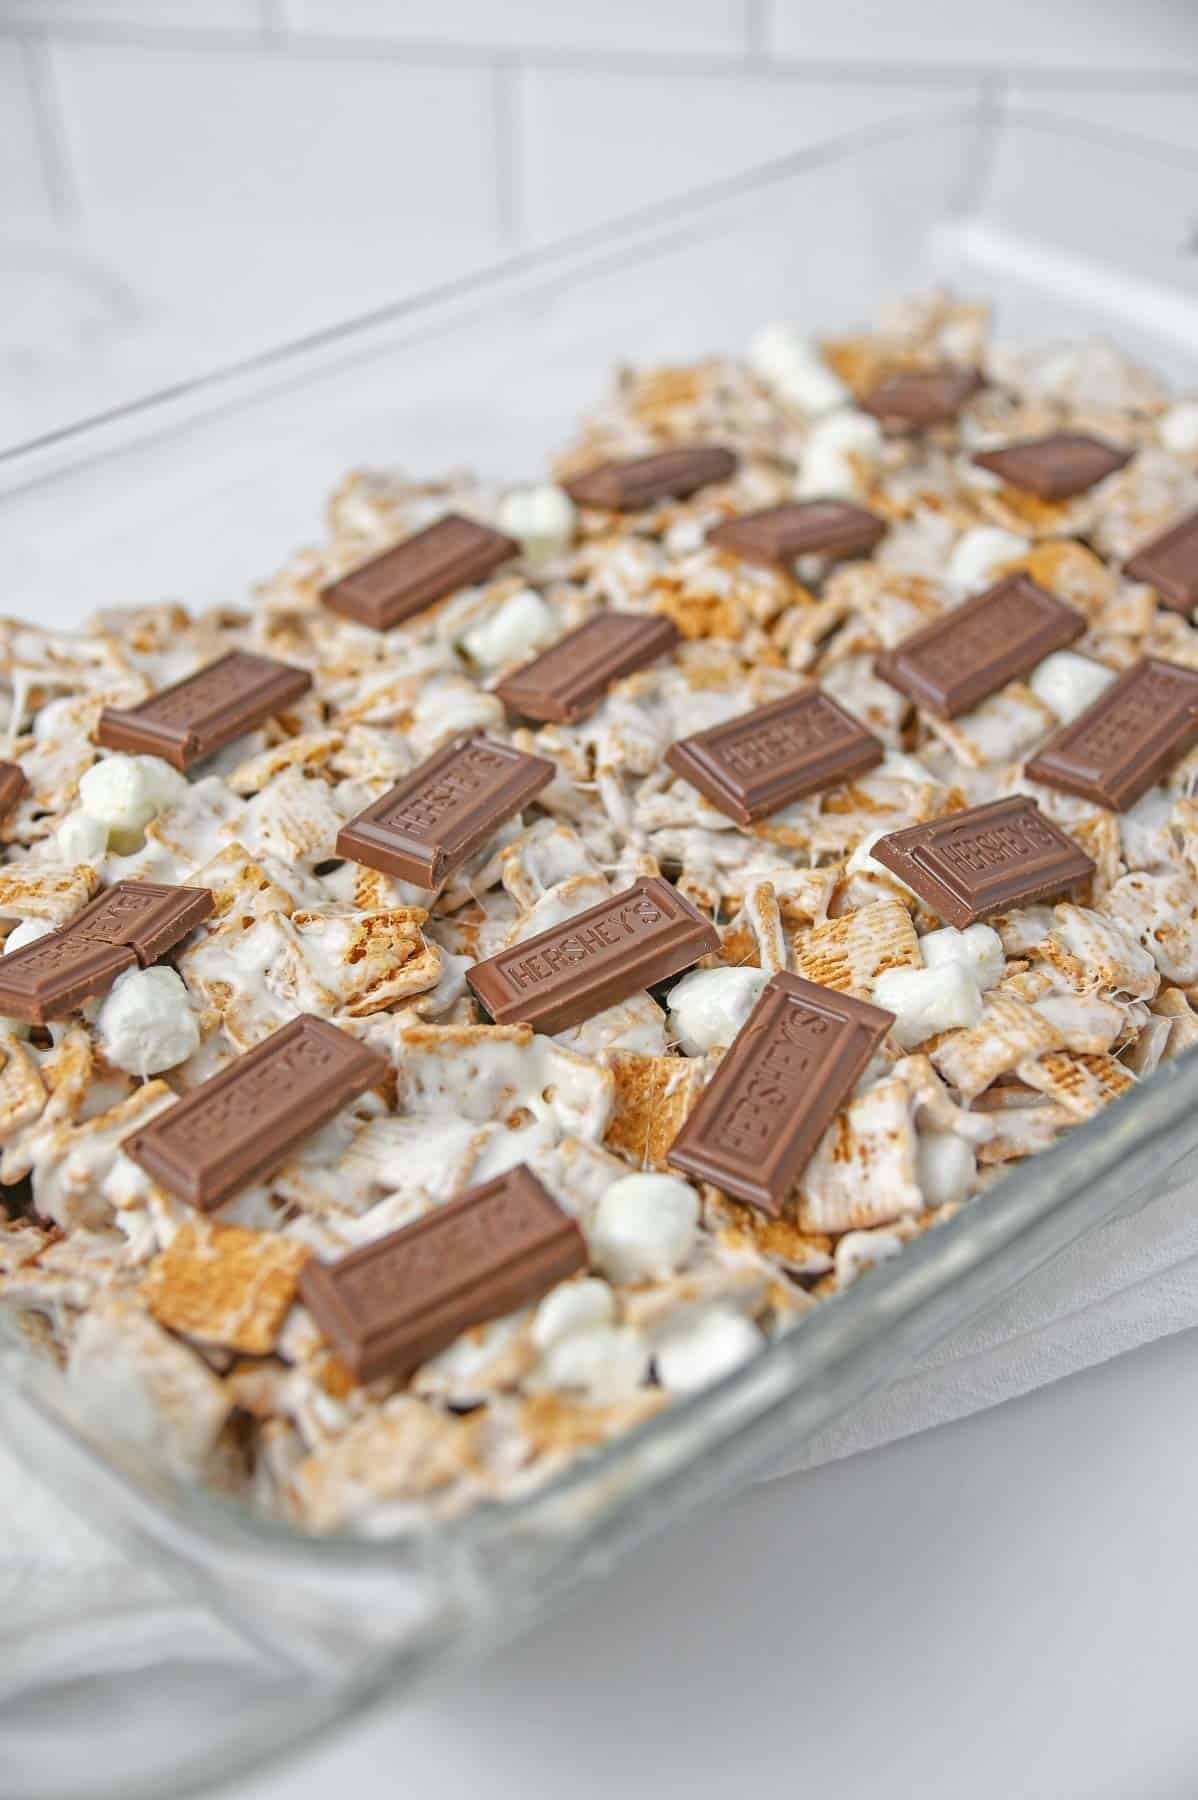 The cereal marshmallow mixture in glass baking dish with chocolate bar pieces on top.